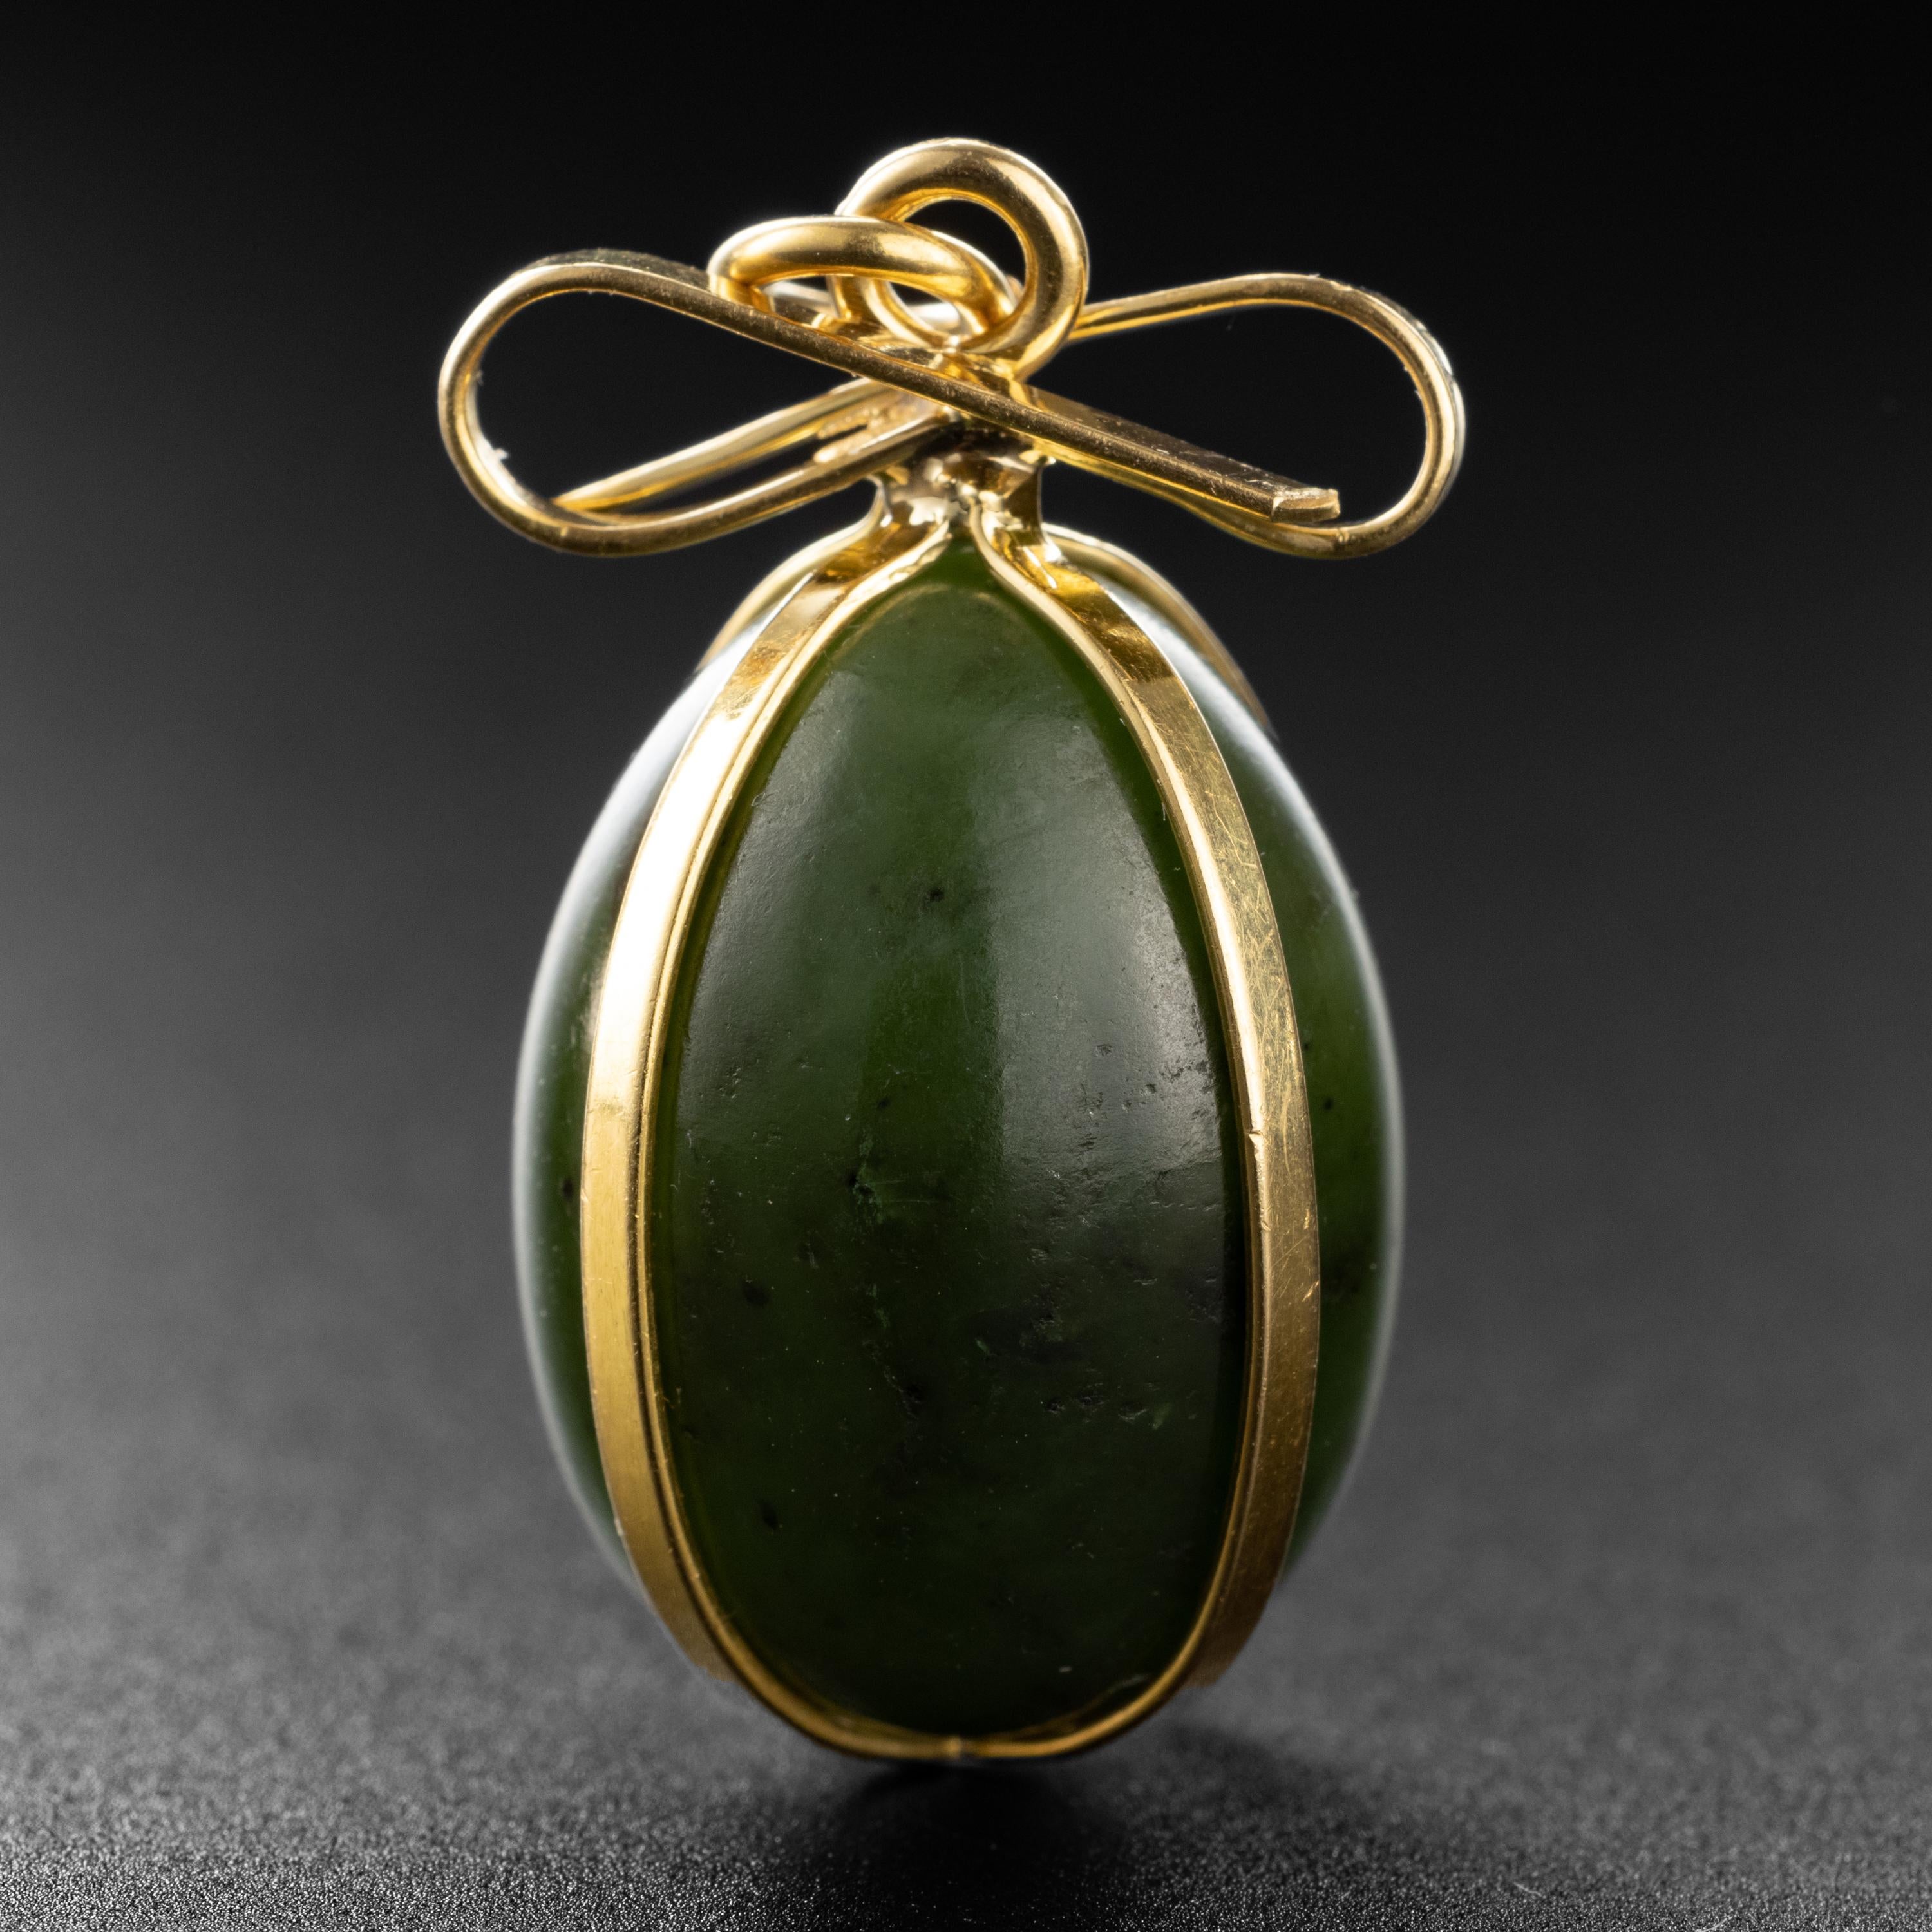 What a treasure for the Gump's collector and jade lover! This 1970's jewel from the iconic San Francisco retailer, Gump's, features a hand-carved deep forest green nephrite jade egg wrapped securely in ribbons of buttery 18k yellow gold and tied